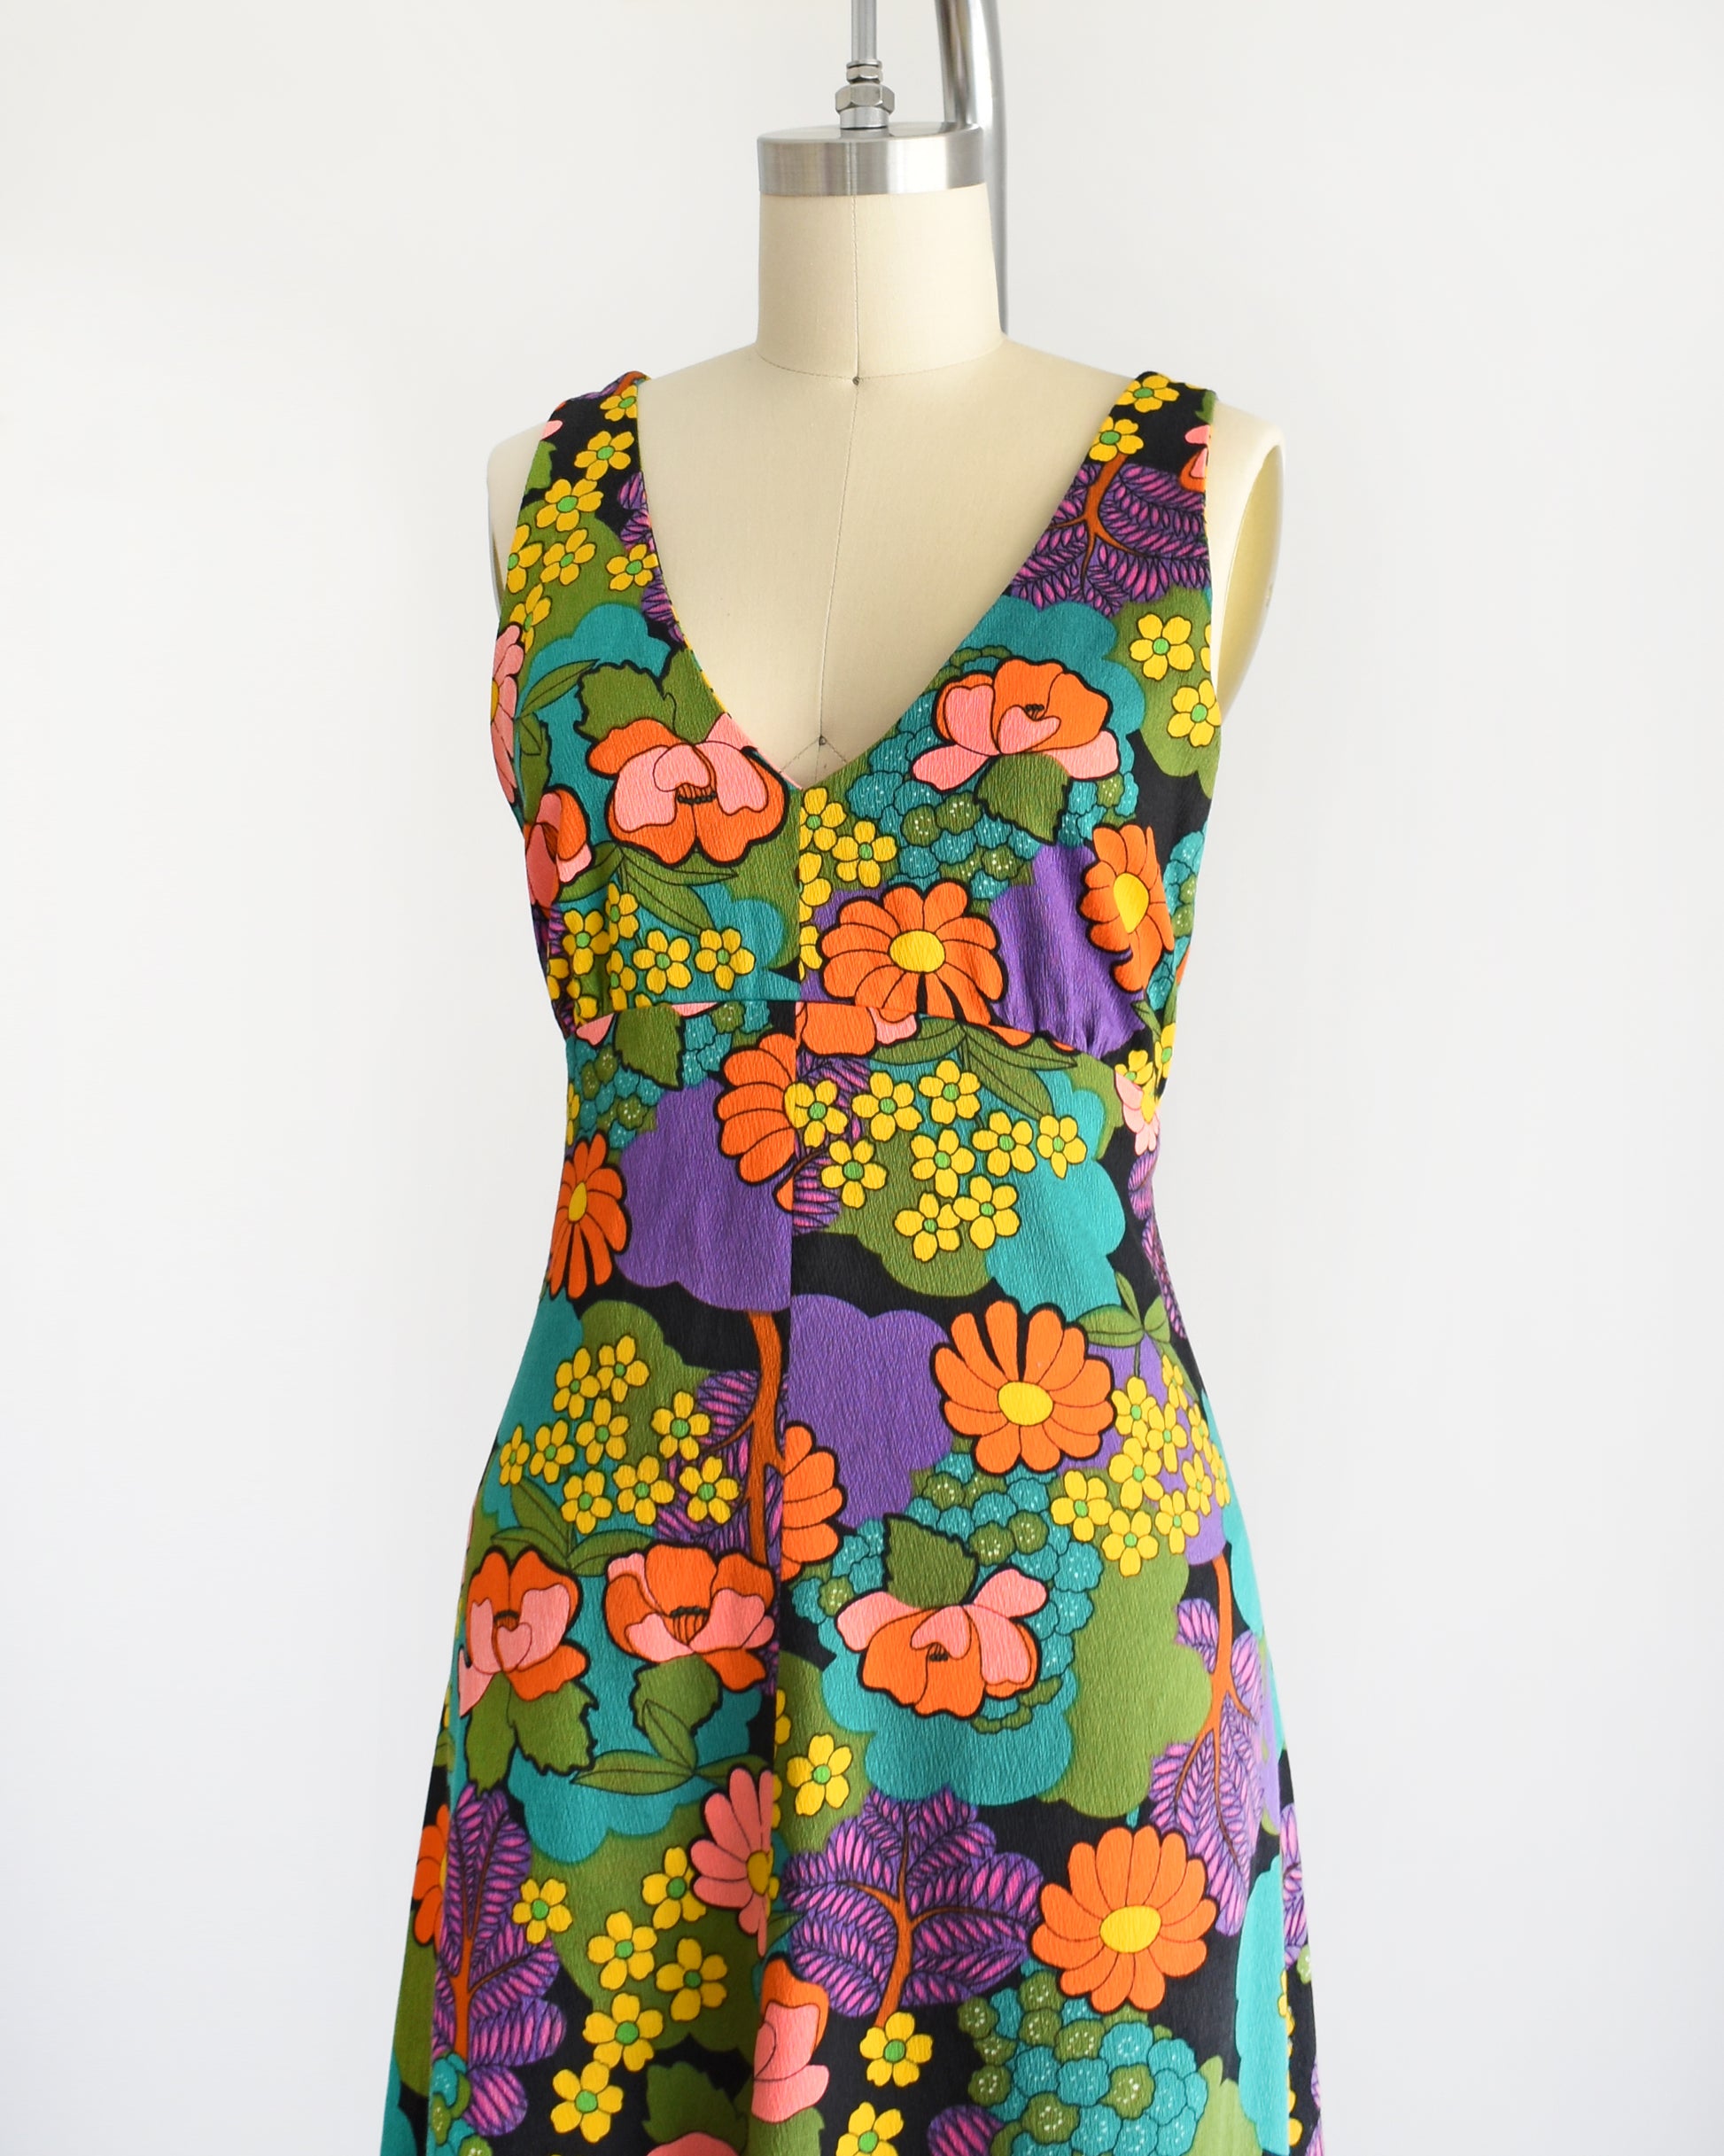 Side front view of a vintage 70s floral maxi dress that is black and has a vibrant flower power print in greens, blue, peach, orange, yellow, purple, and white. V-neckline. Dress is on dress form.